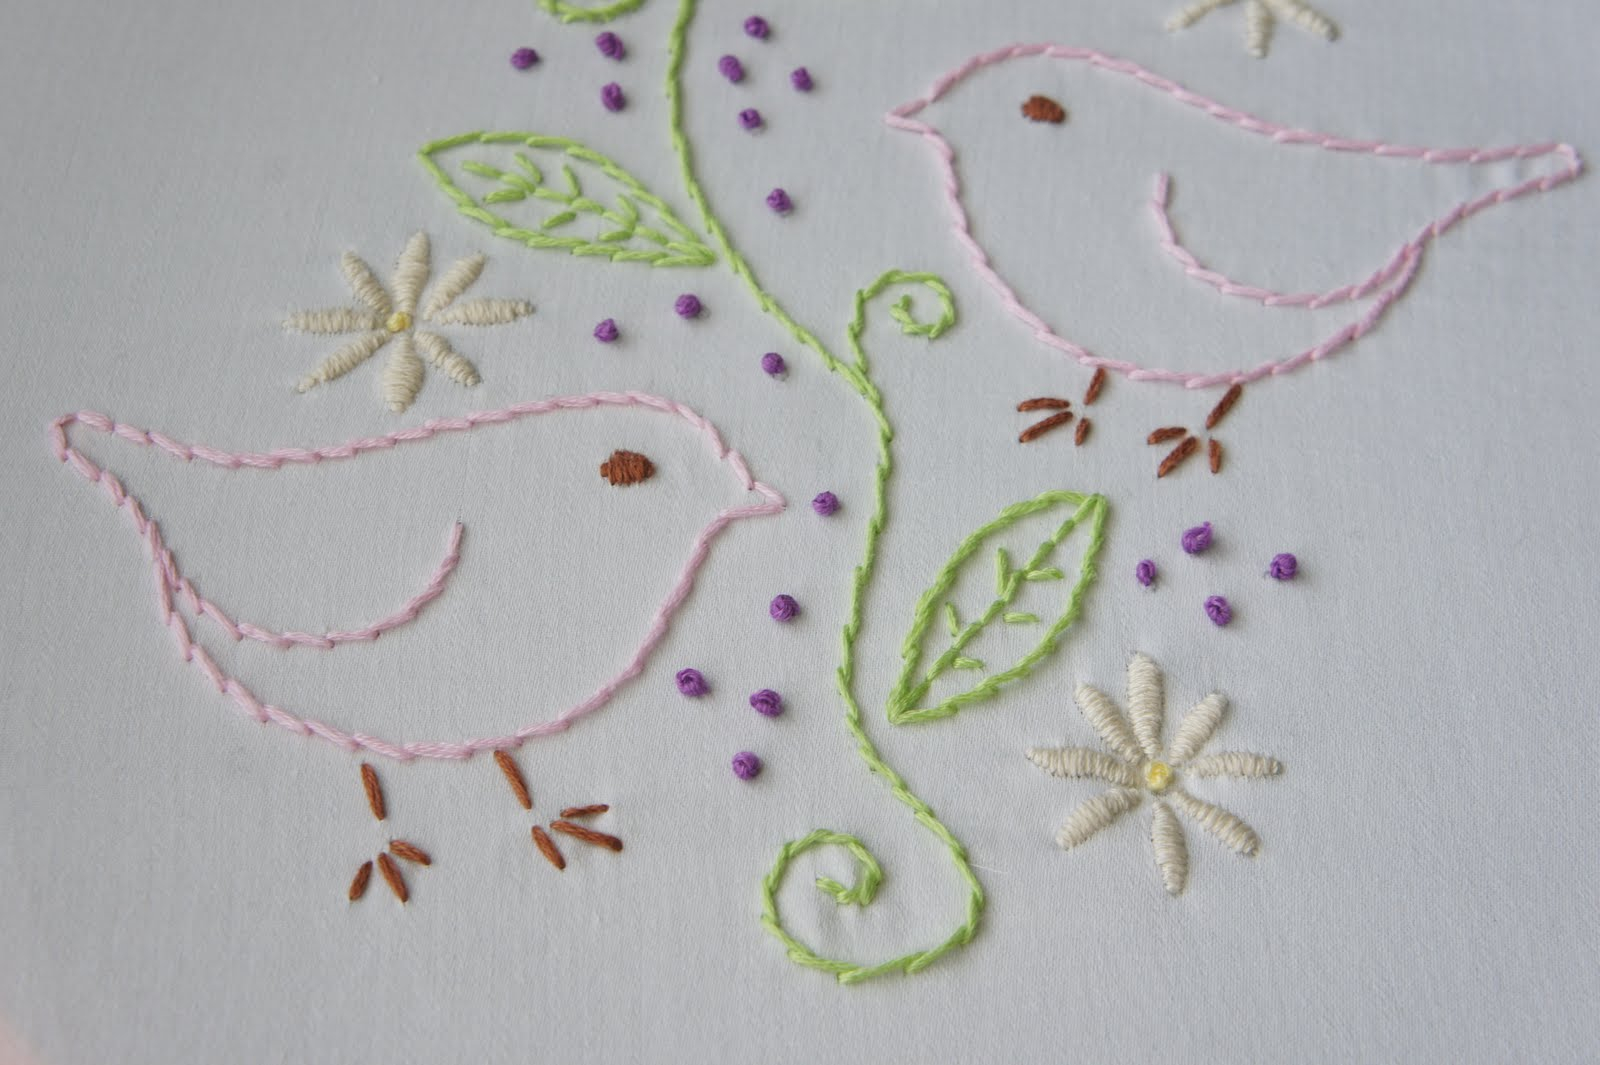 Bird Embroidery Patterns Free Free Embroidery Patterns Video Free Embroidery Patterns